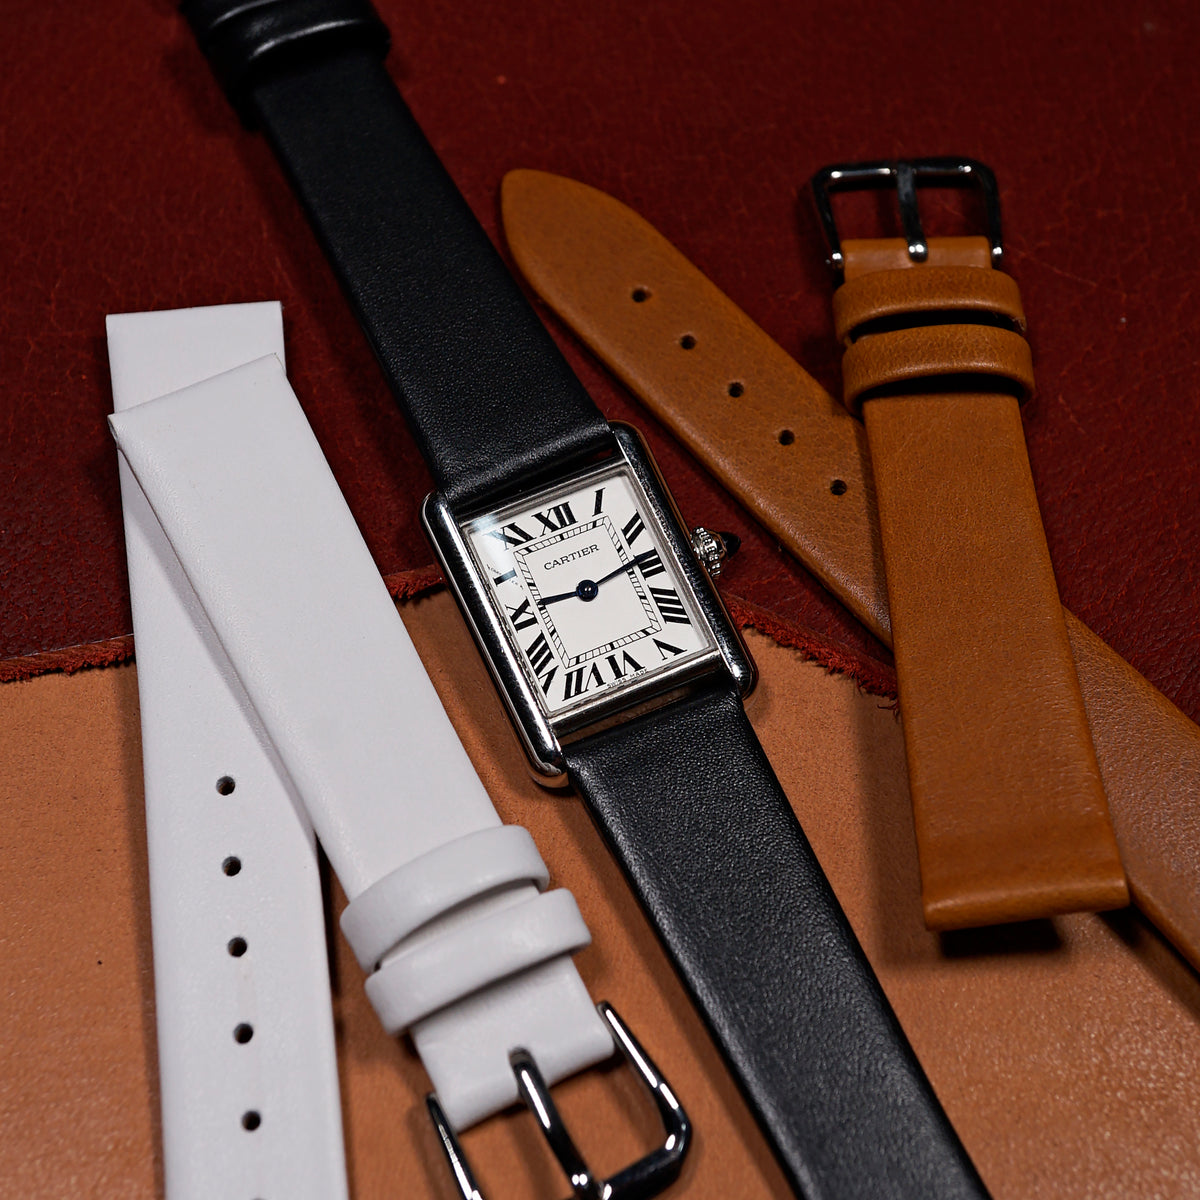 Unstitched Smooth Leather Watch Strap in Black - Nomad Watch Works SG